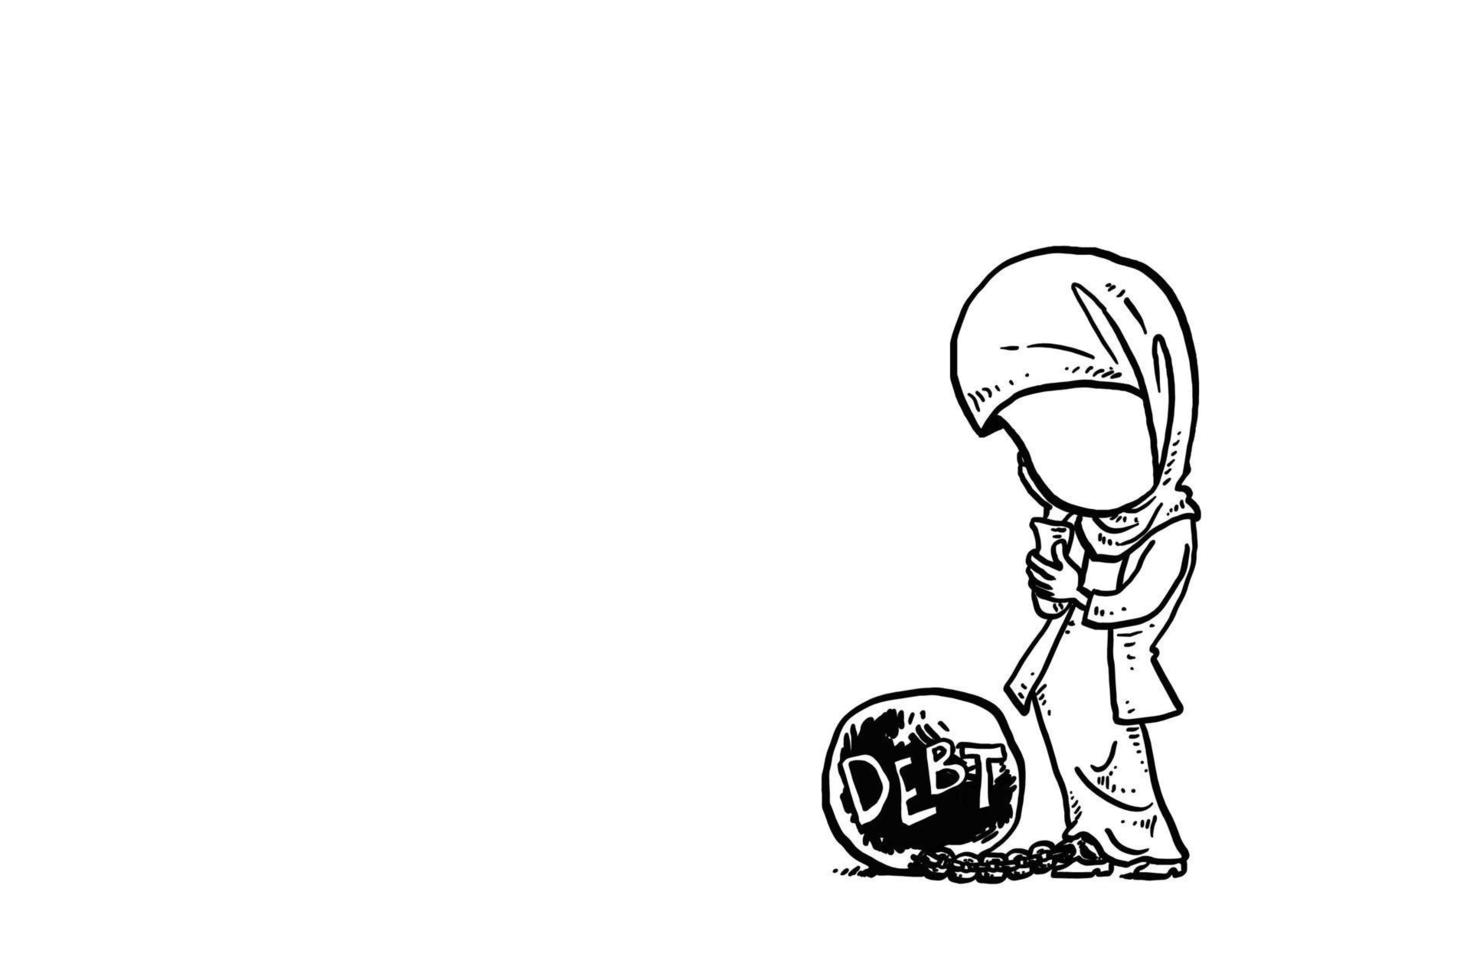 Asian muslim businesswoman trapped and chained by big iron ball. Cartoon vector illustration design